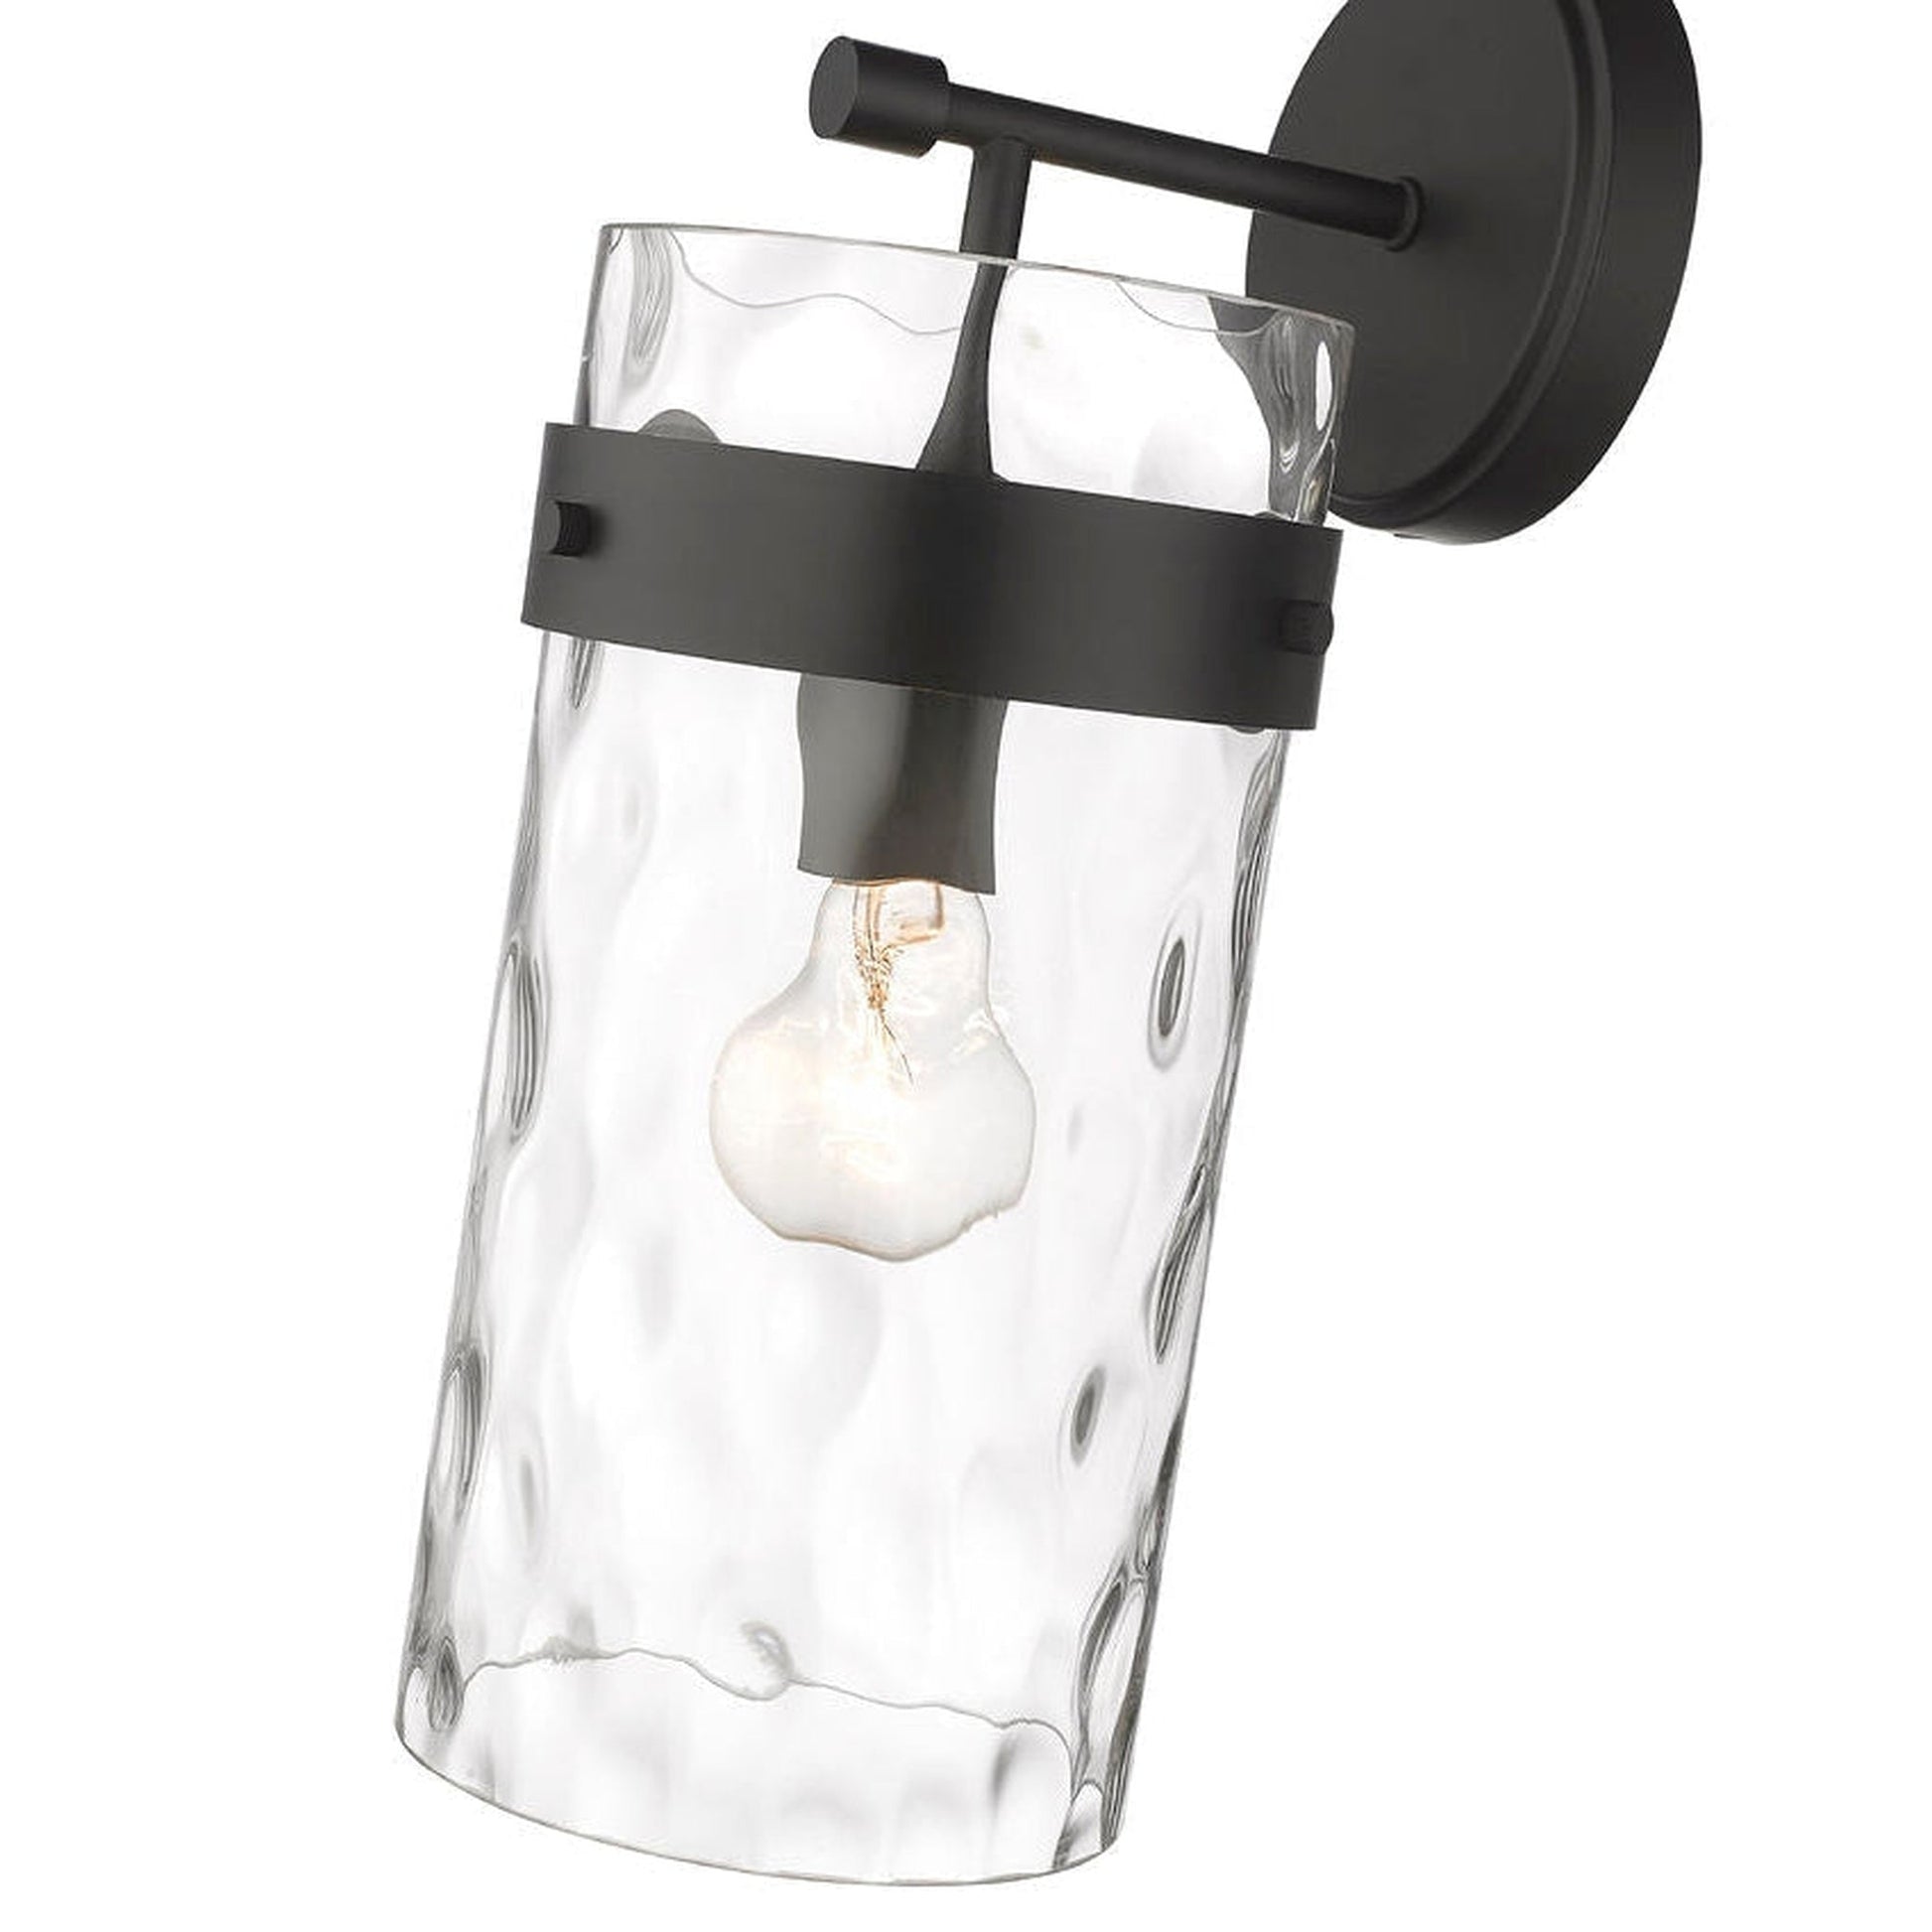 Z-Lite Fontaine 7" 1-Light Matte Black Wall Sconce With Clear Glass Shade